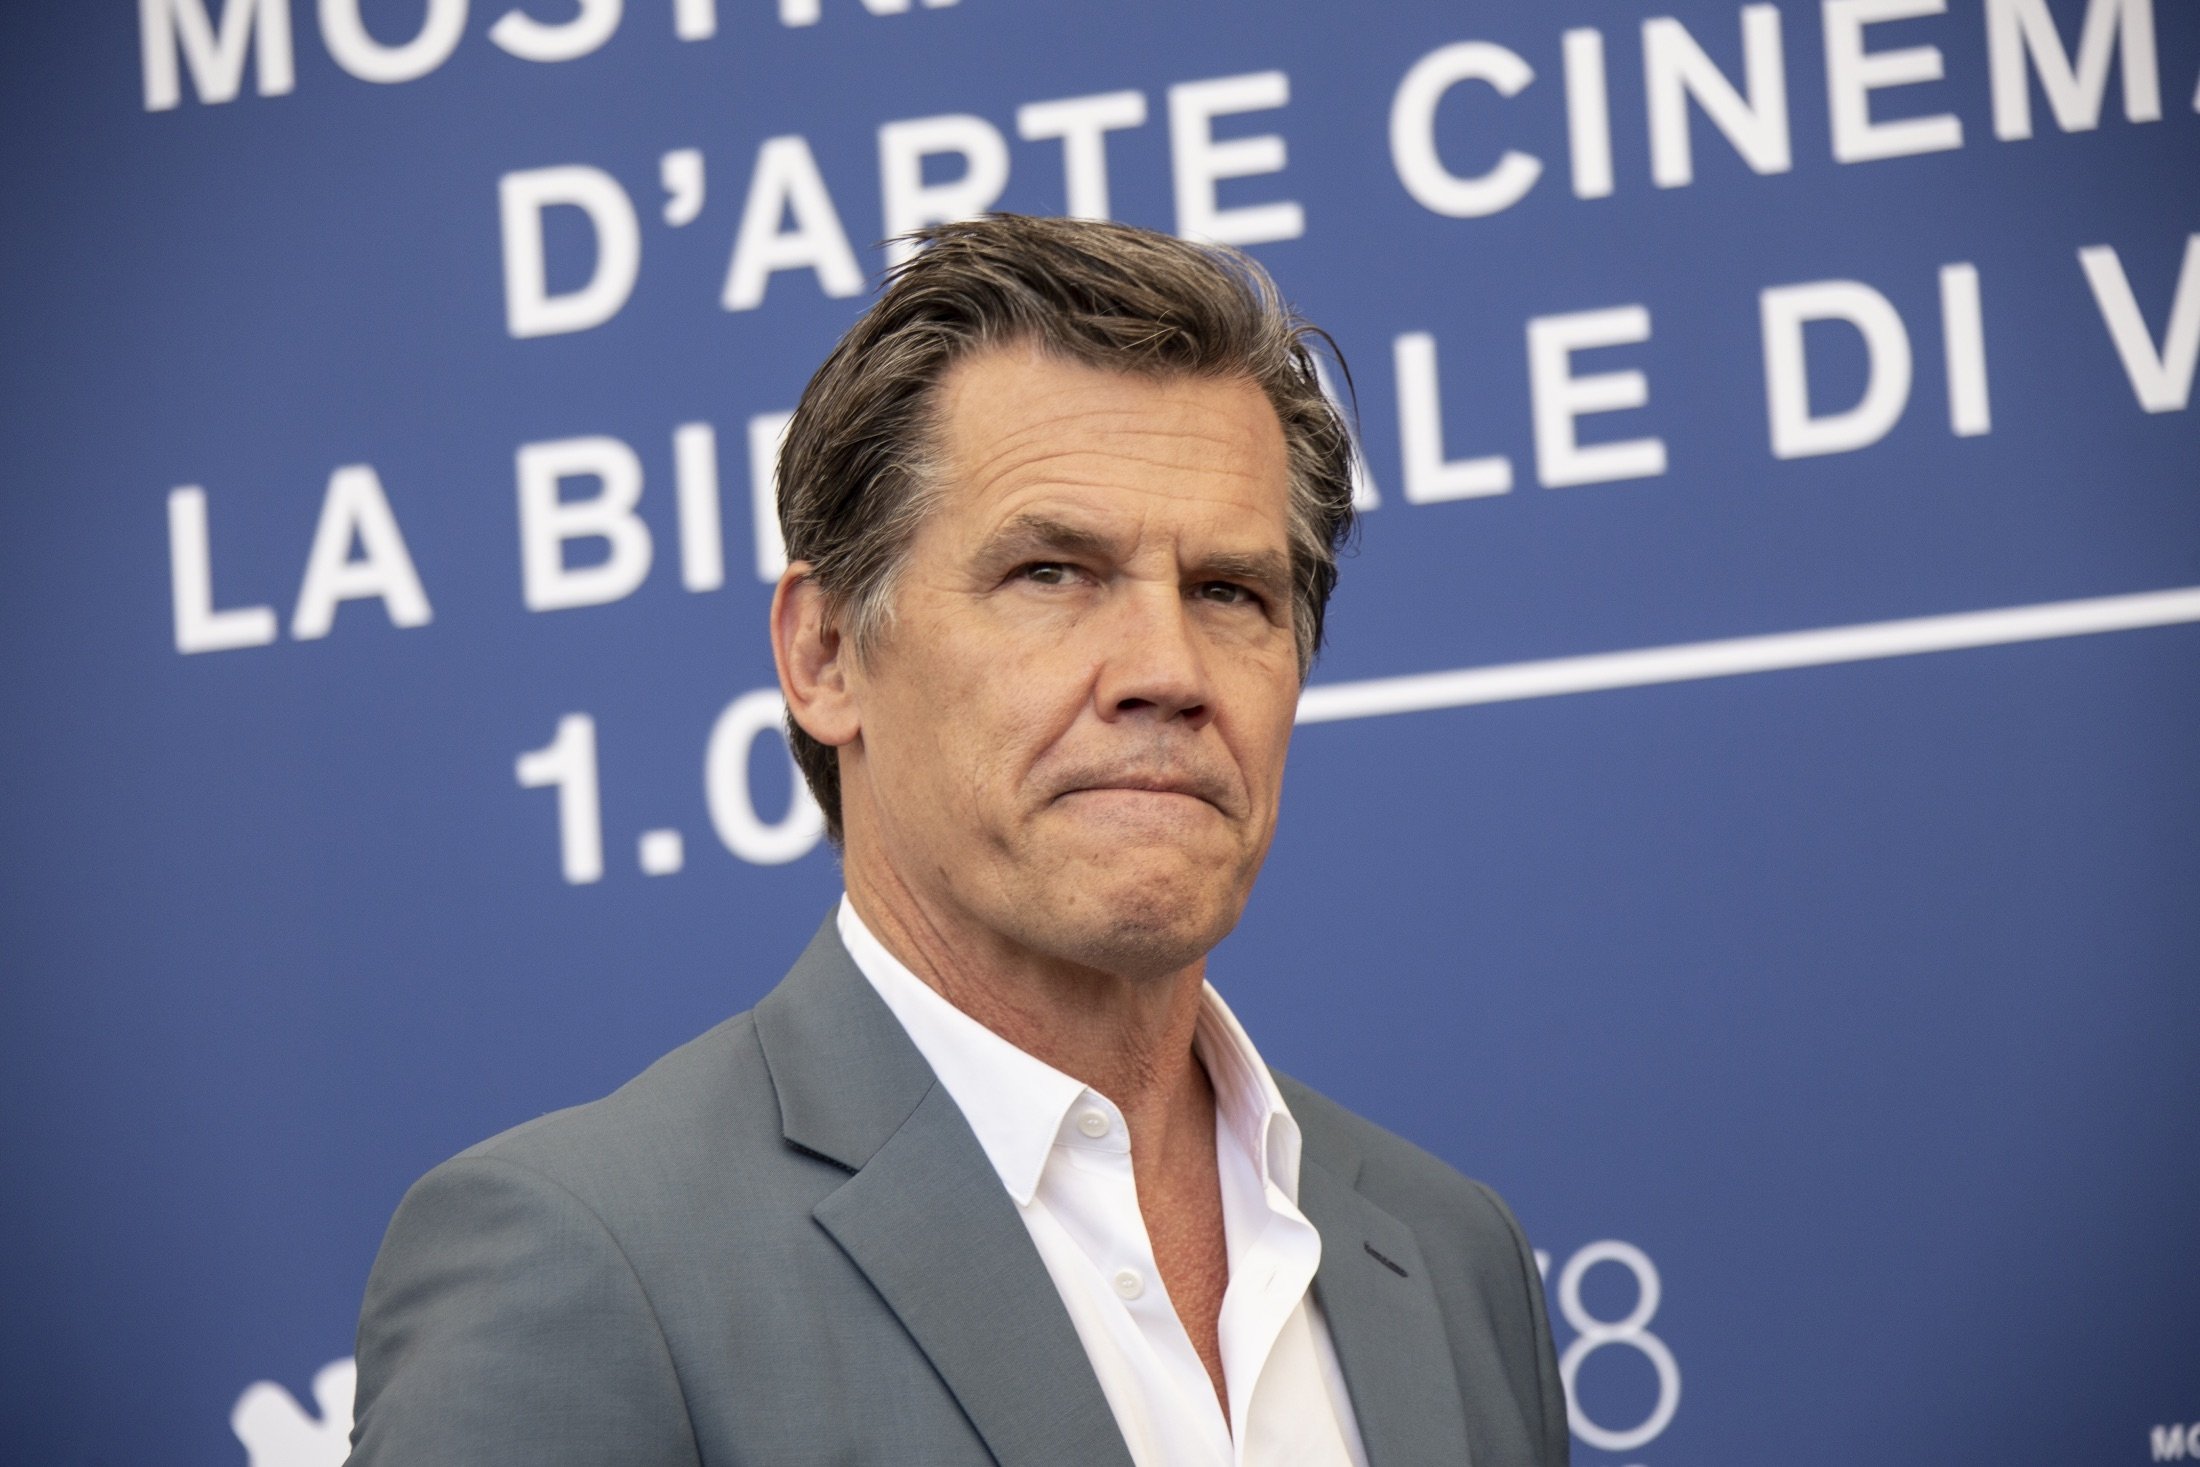 Josh Brolin poses for photographers at the photocell for the film “Dune” at the 78th Venice Film Festival, in Venice, Italy, Sept. 3, 2021. (AP Photo)